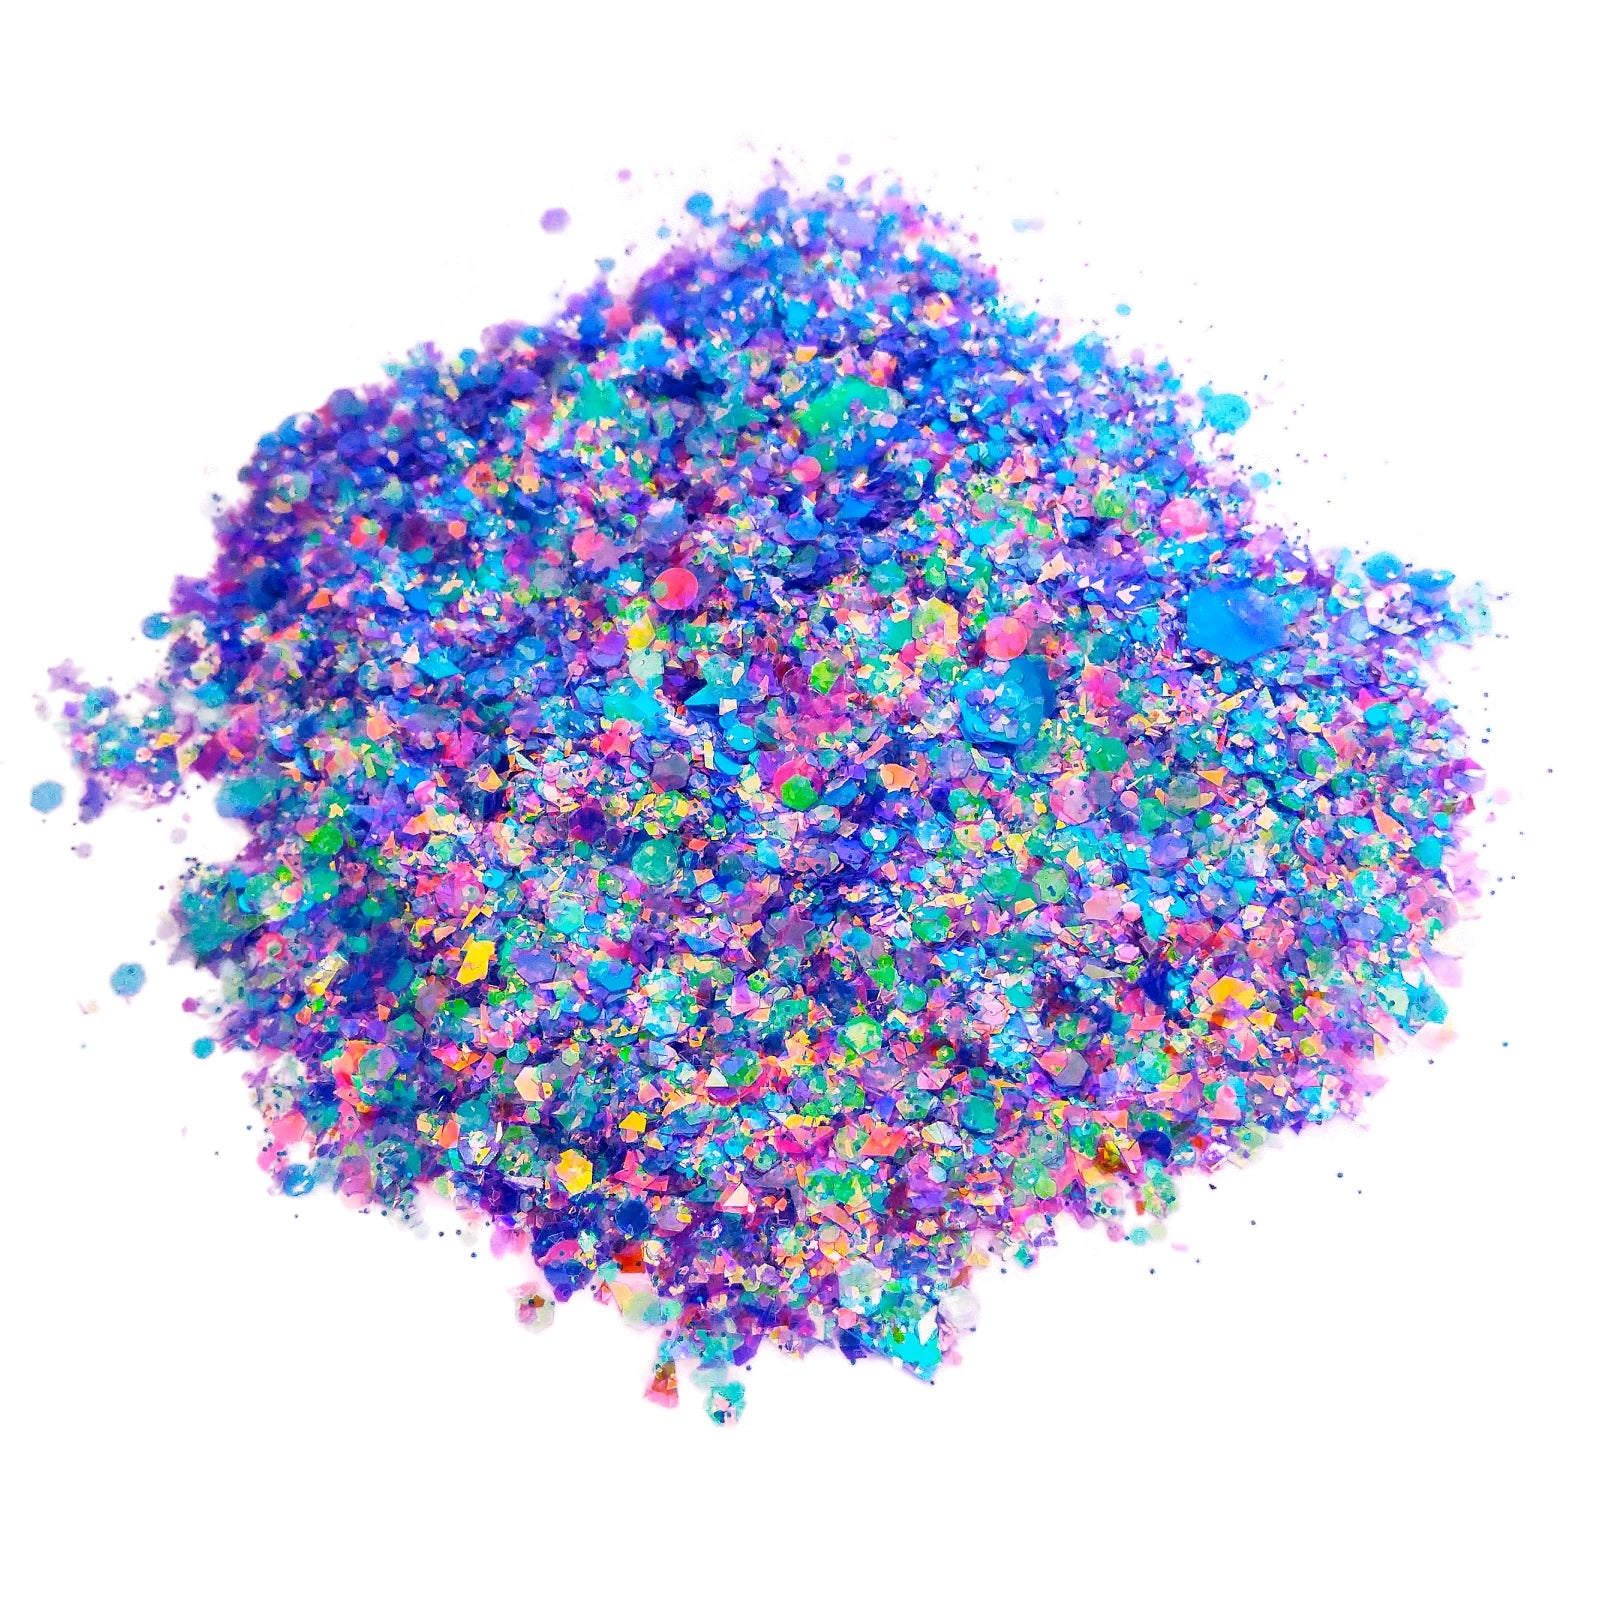 Turquoise, Teal and Purple Glitter Mix - Little Mermaid By Crazoulis Glitter